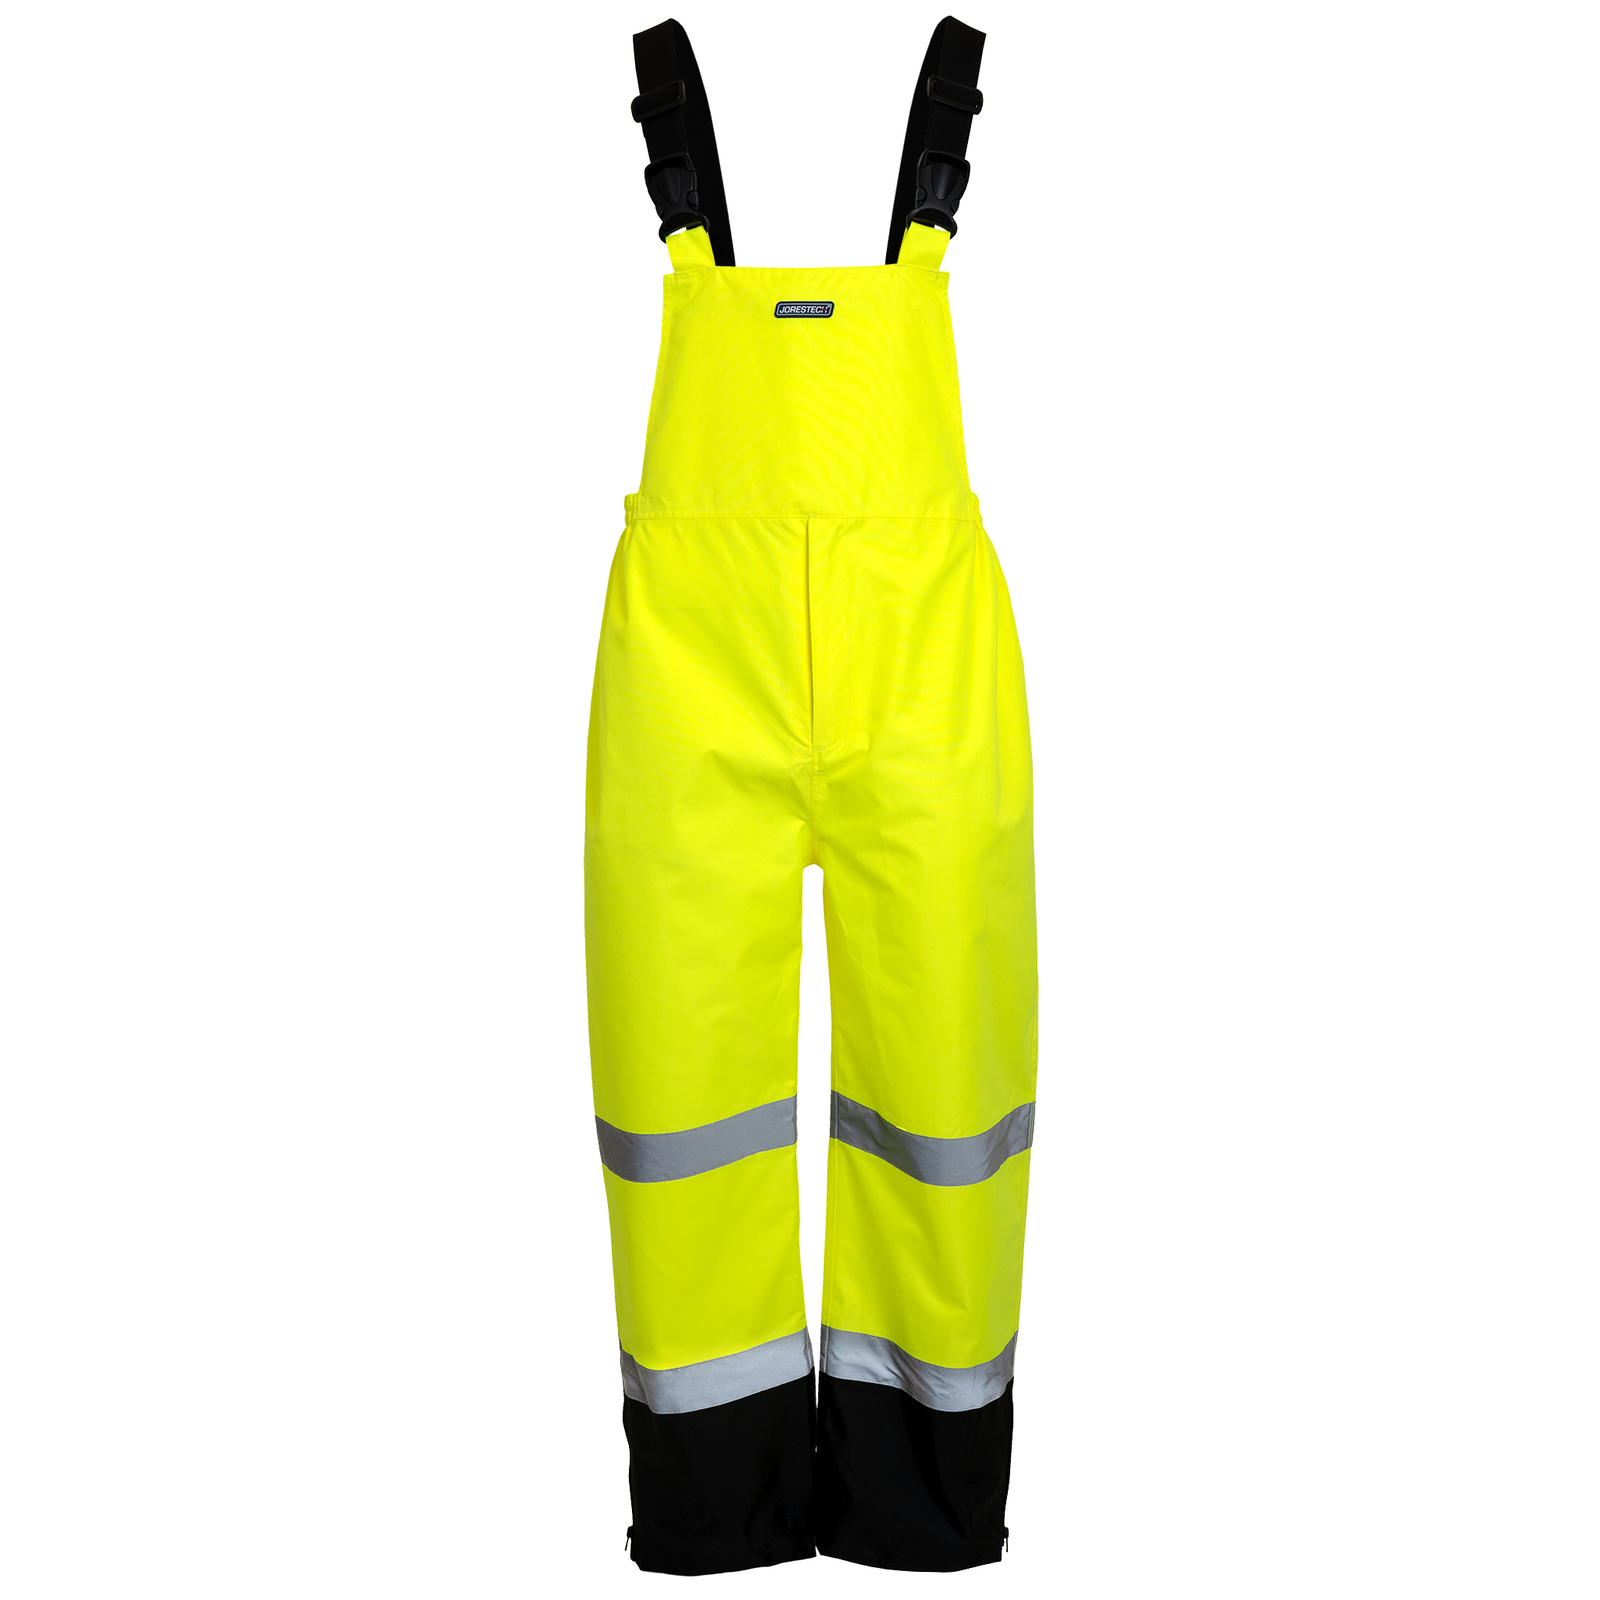 Hi vis waterproof safety overall pants with reflective stripes for workers